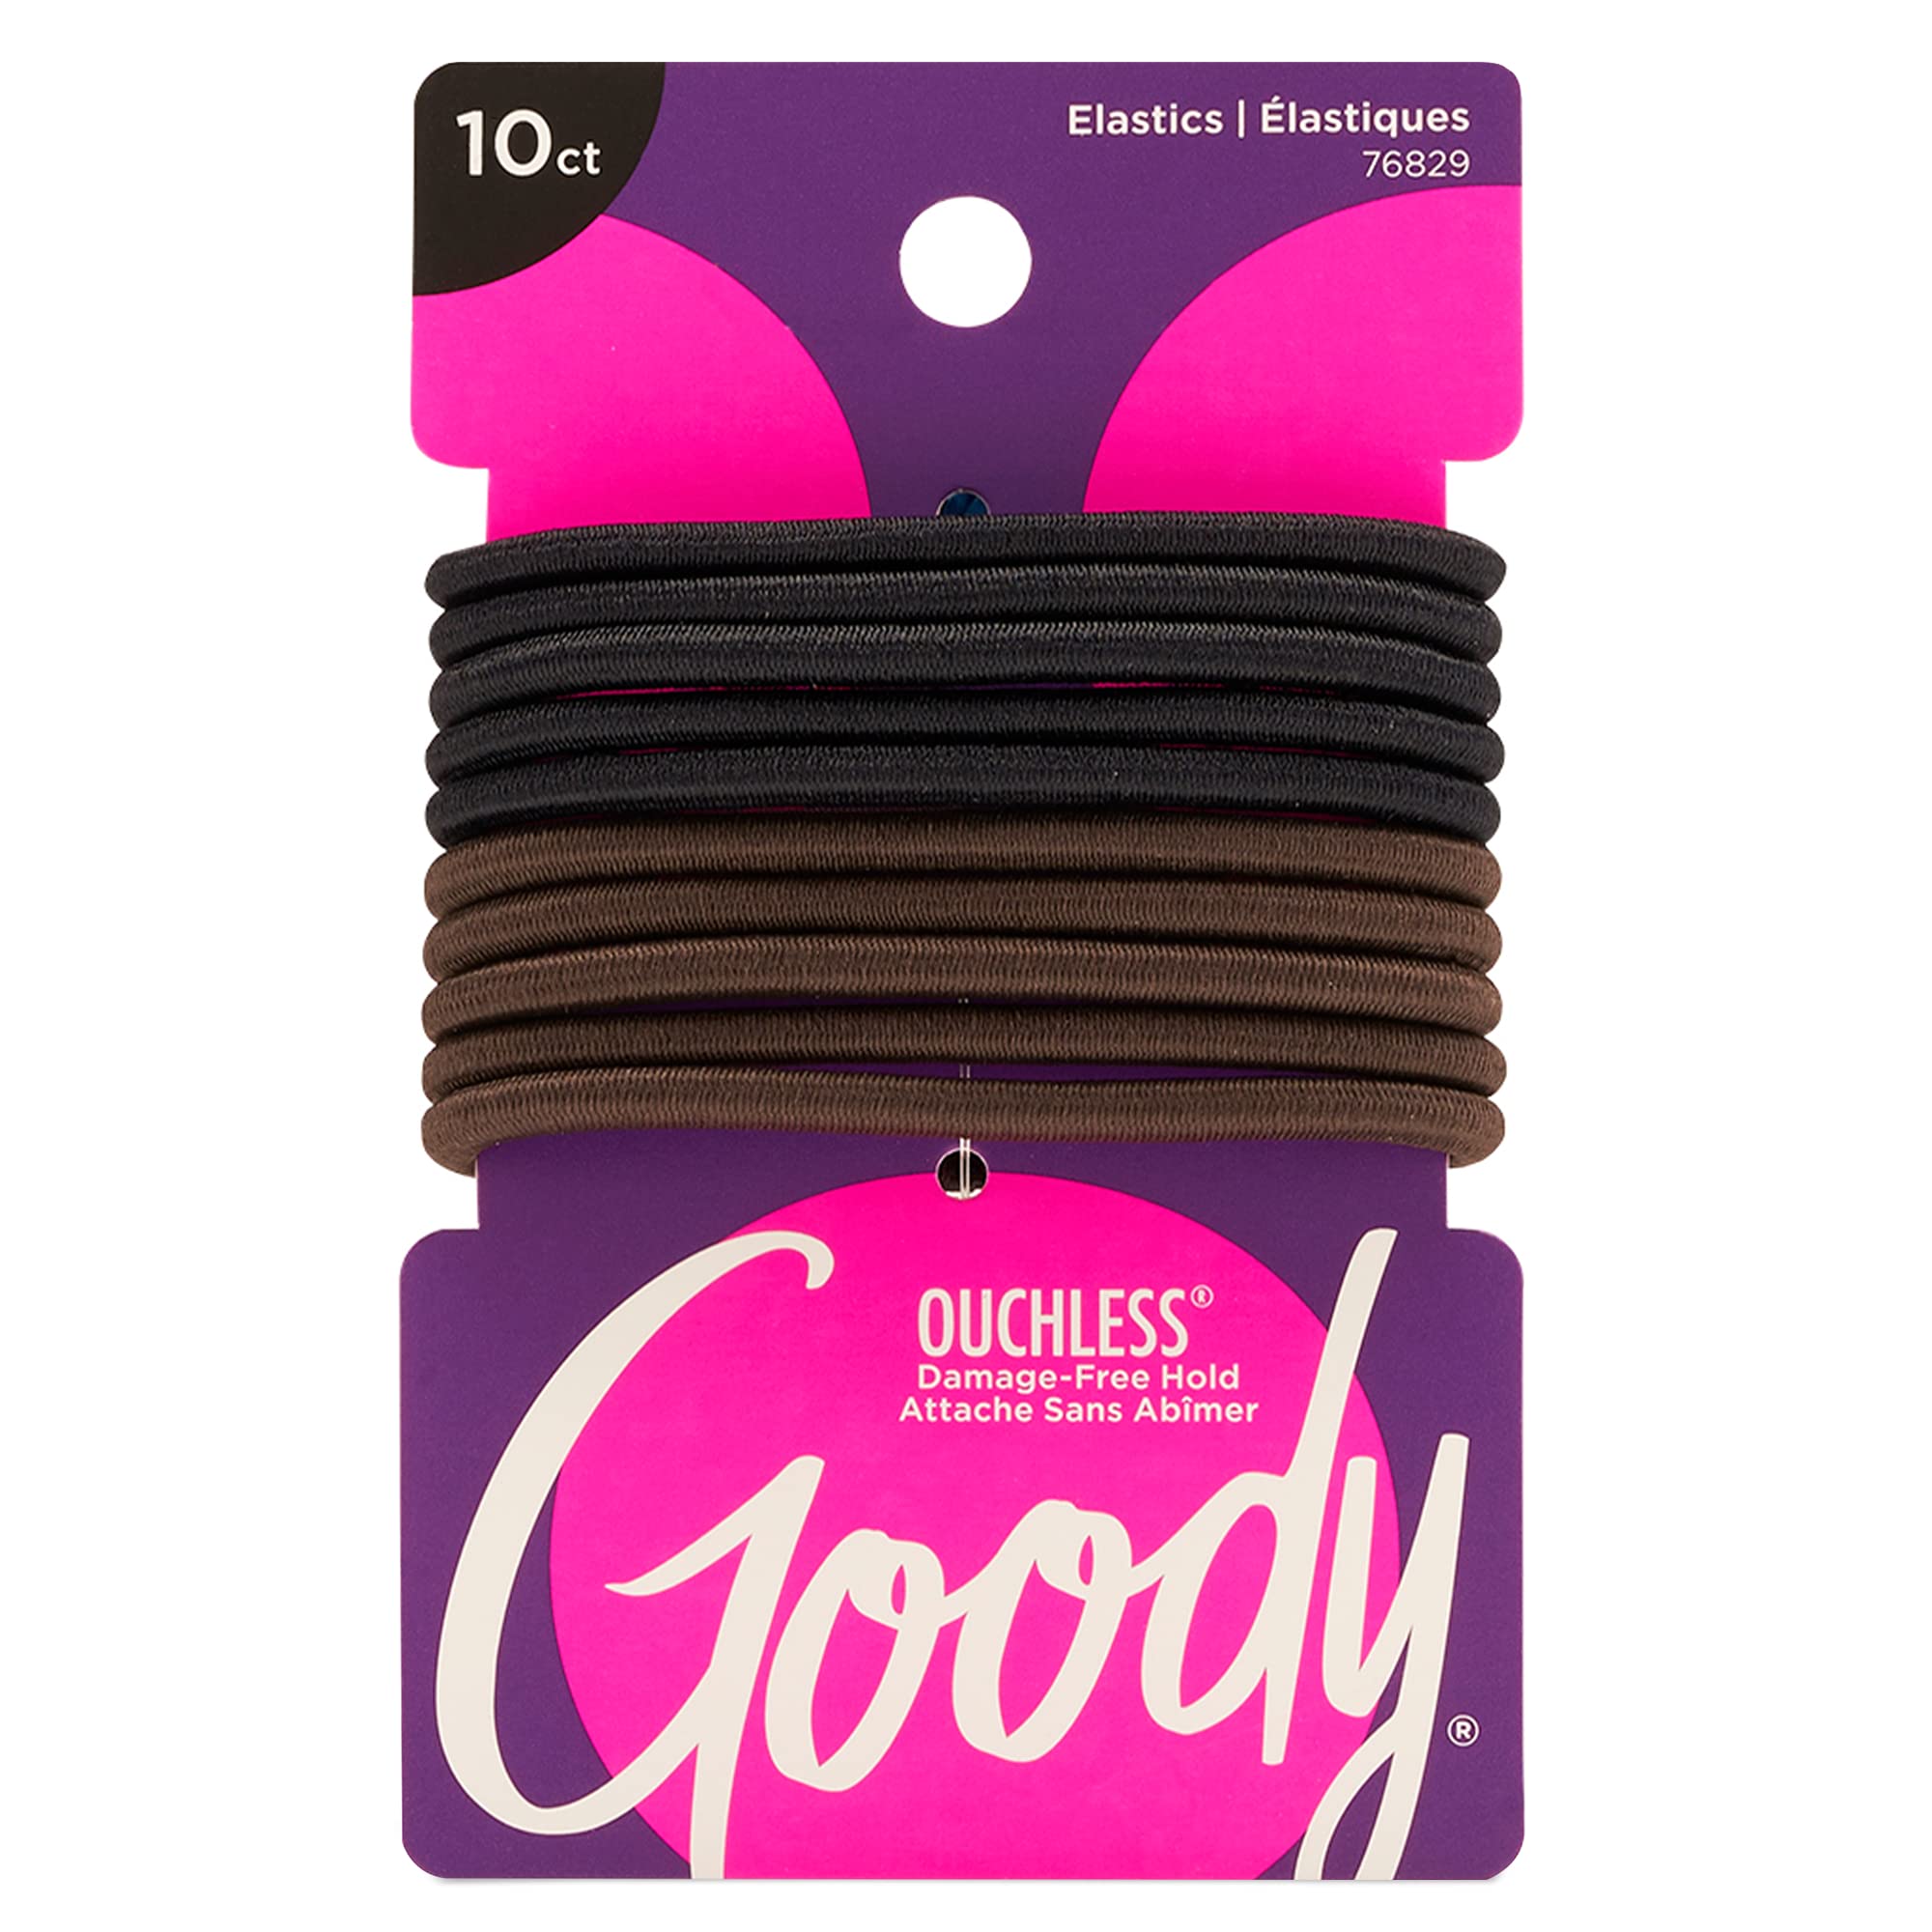 Goody Nonslip Womens Elastic Hair Tie - 10 Count, Colour Collection, Black - 4MM for Medium Hair- Ouchless Hair Accessories for Women Perfect for Long Lasting Braids, Ponytails and More - Pain-Free